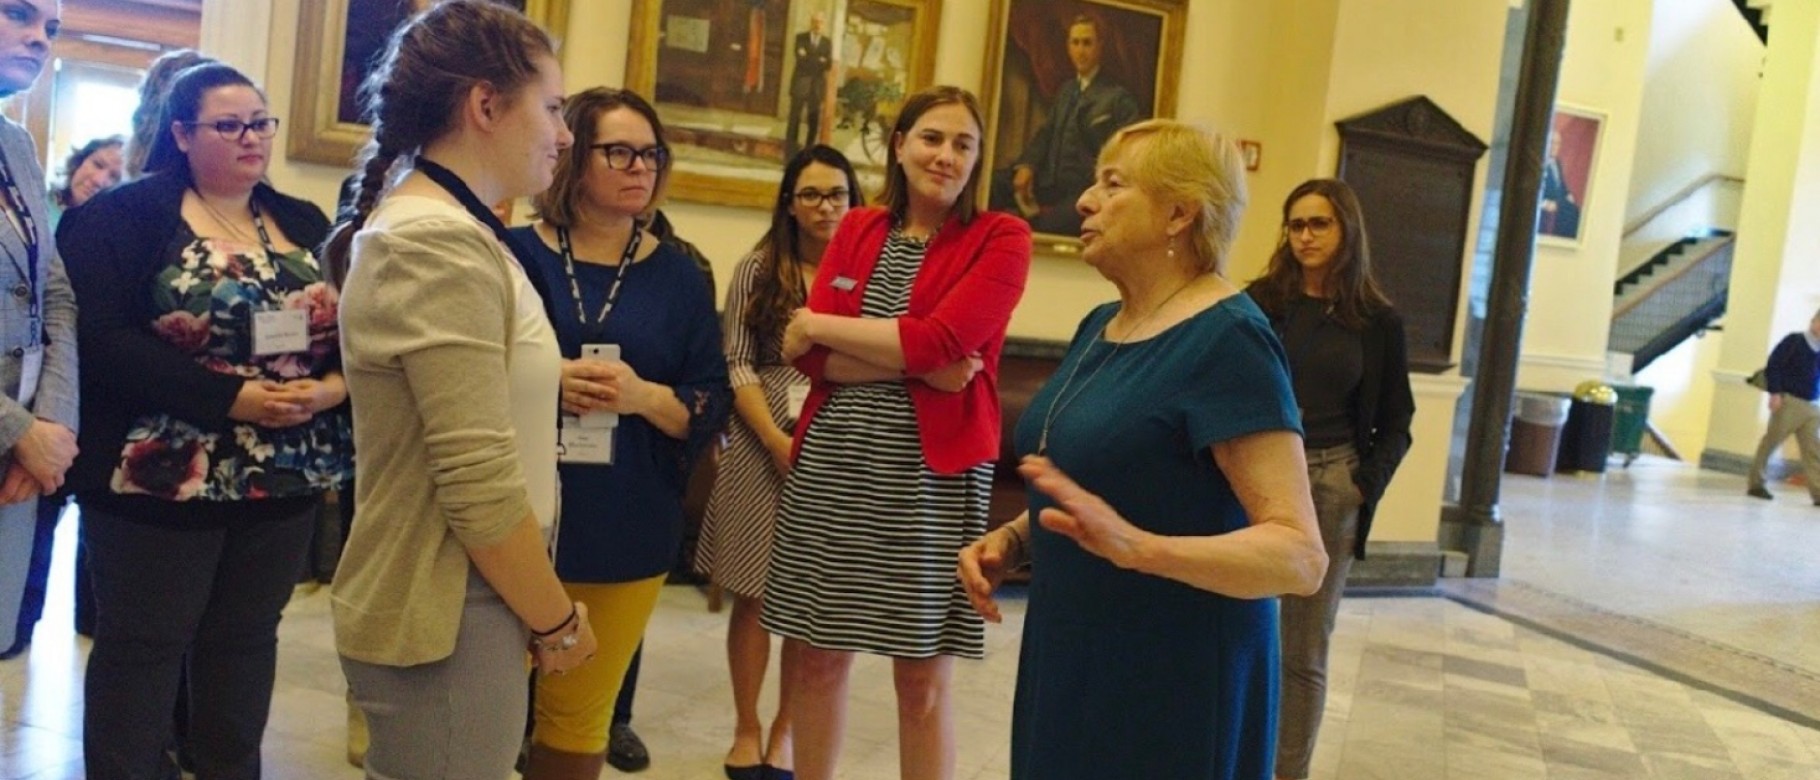 Erynn Mills meets Maine's first female governor Janet Mills at the Maine State House